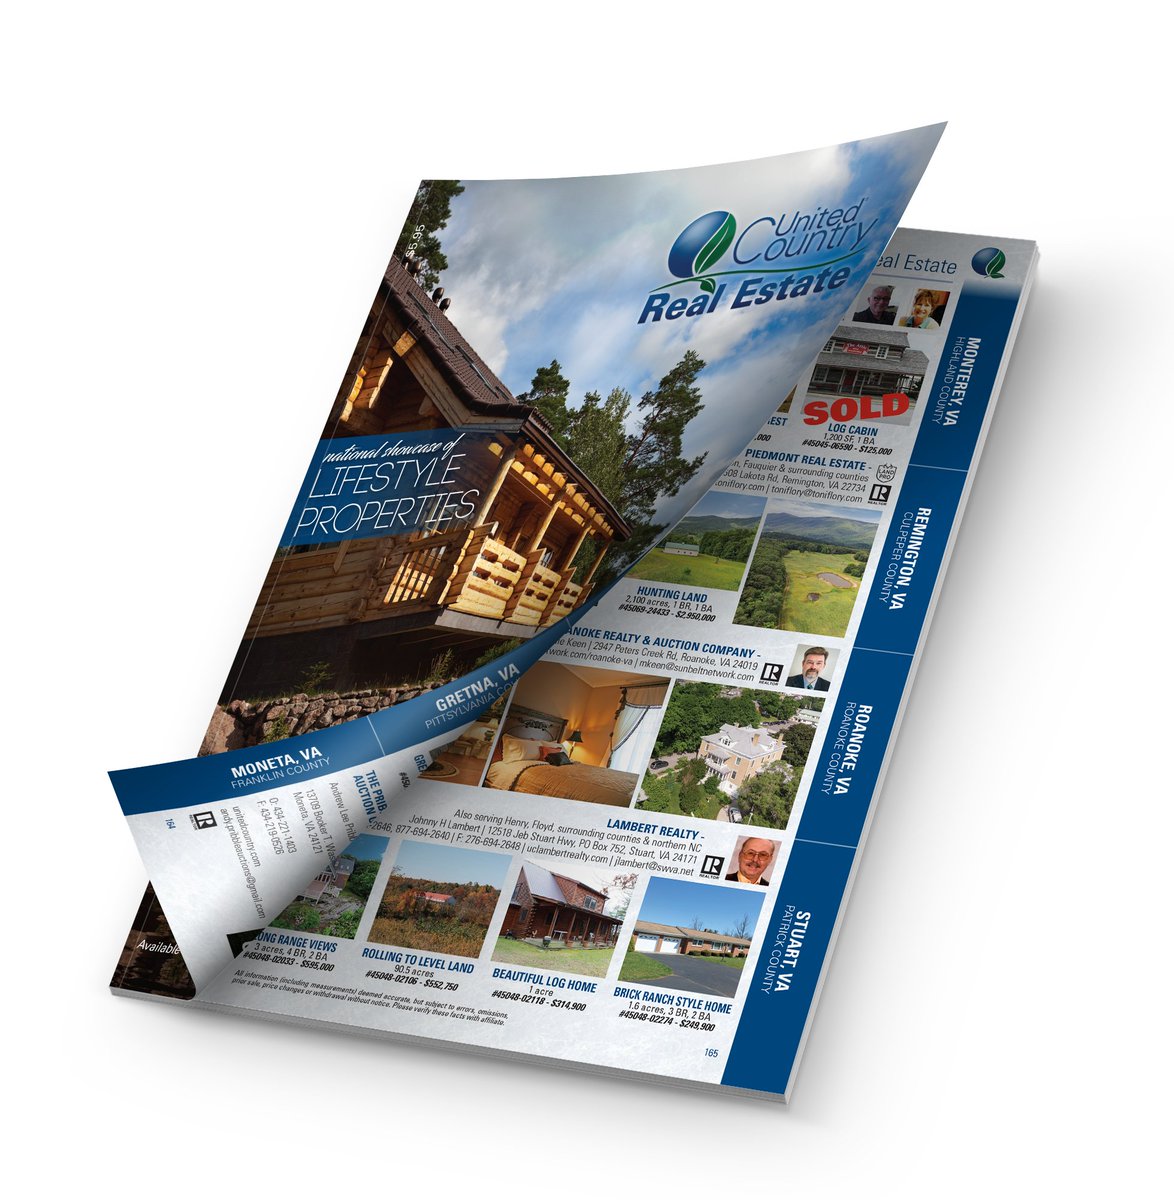 HOT OFF THE PRESSES! The United Country Catalog is filled with a variety of worldwide lifestyle properties like country homes, farms & ranches, waterfront properties, recreational properties and more. Get a printed copy or download a digital version. unitedcountry.com/Publications.